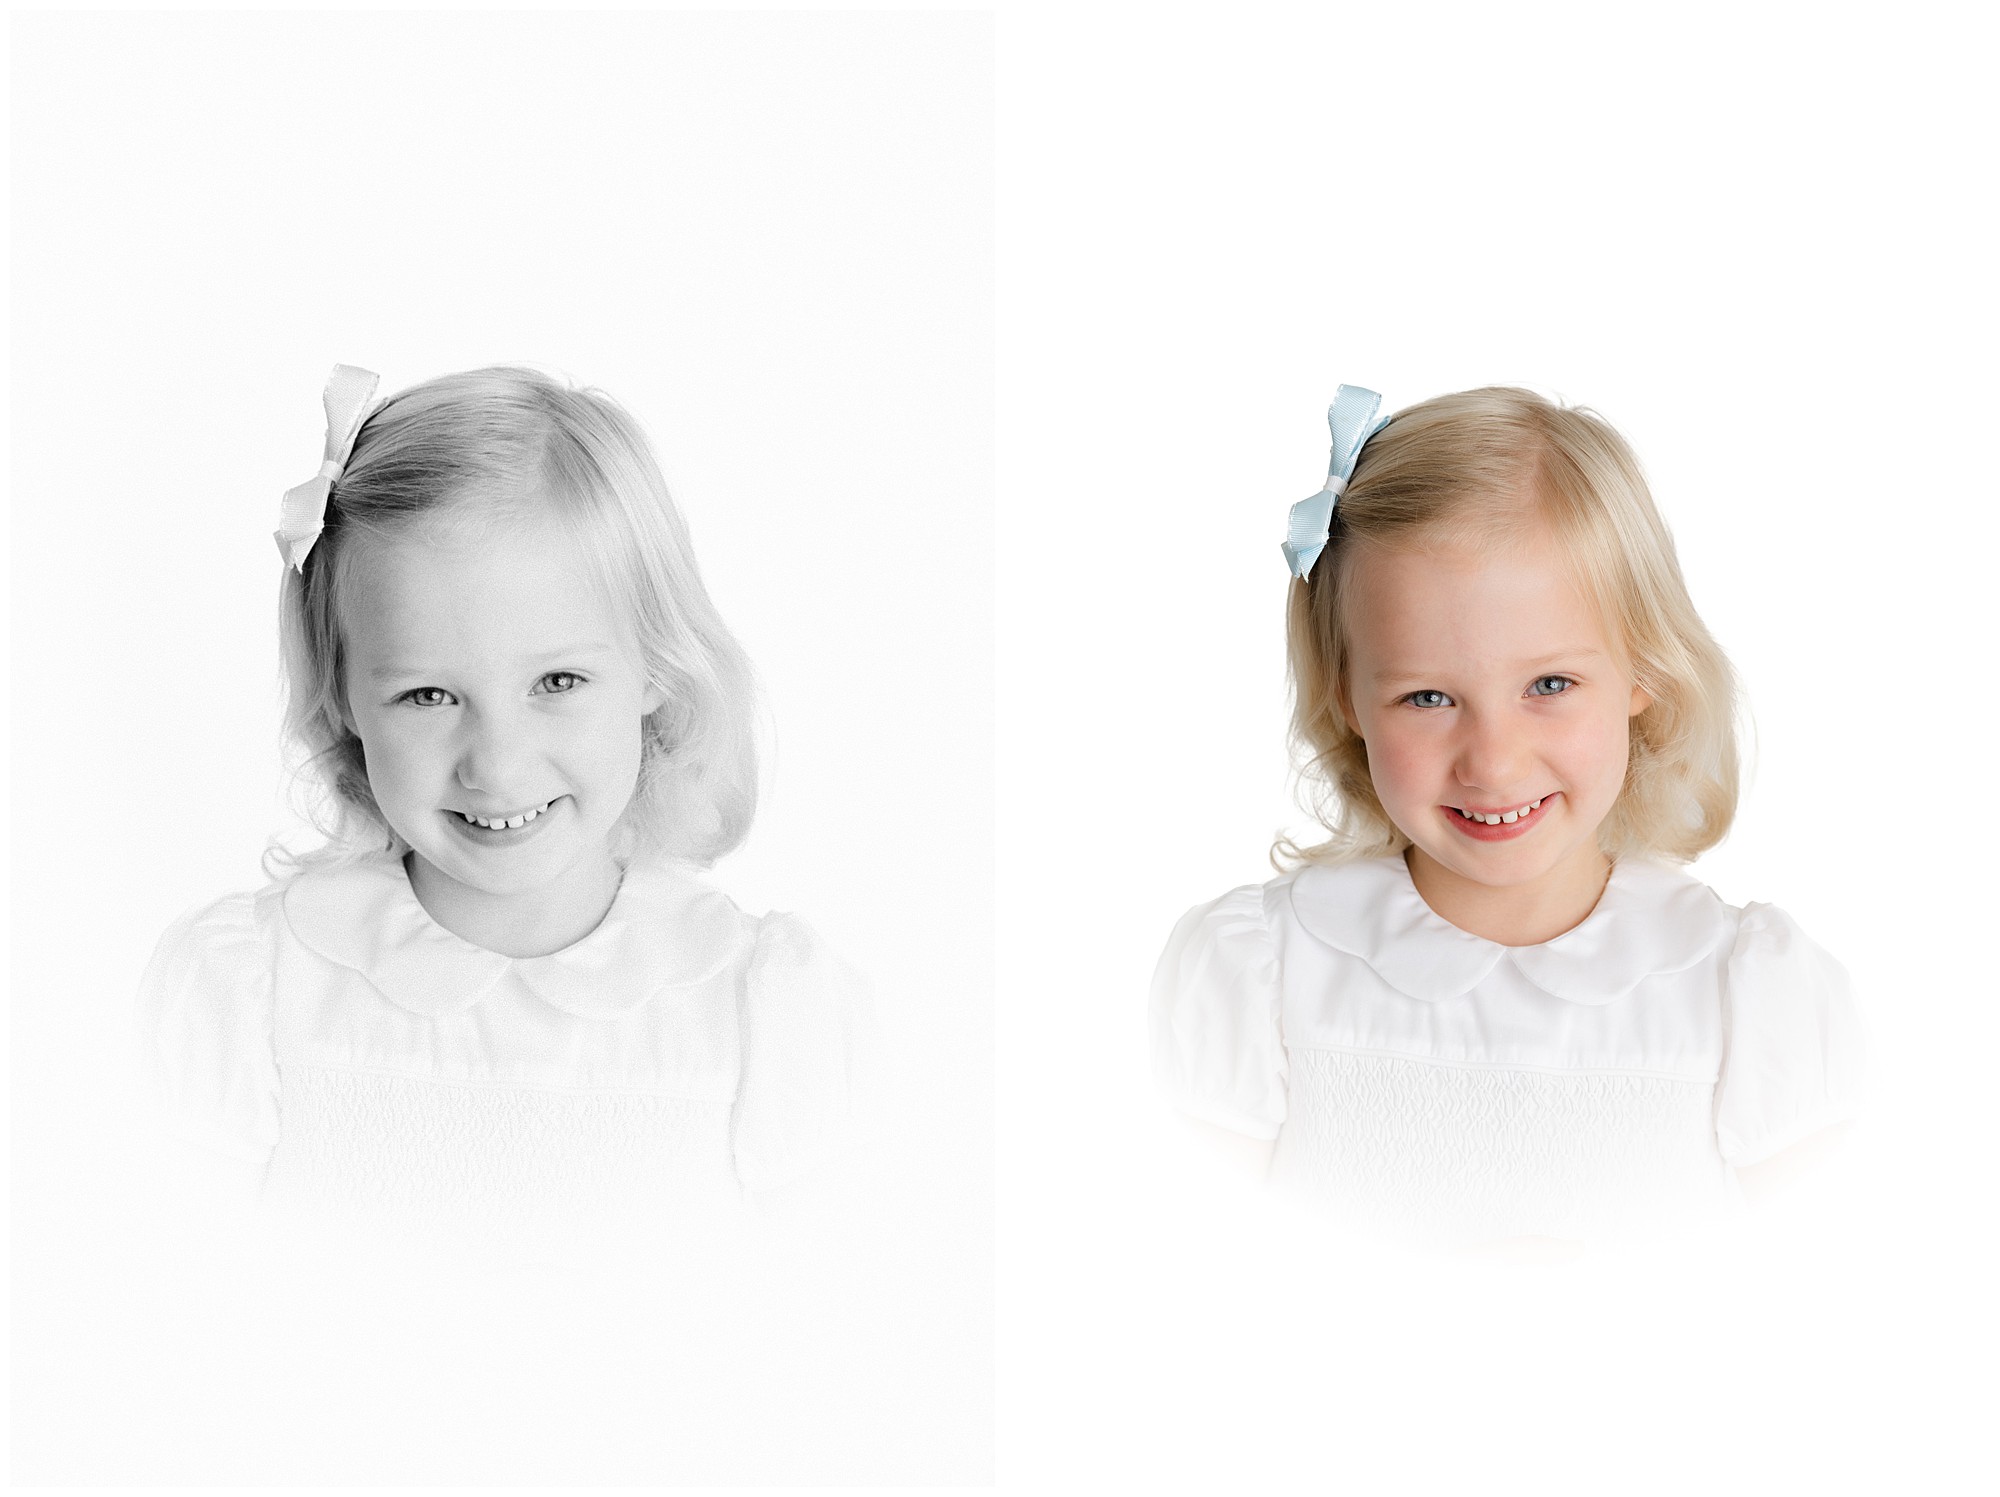 A color and black and white version of an heirloom portrait of a young girl smiling for a Marietta heirloom photographer.